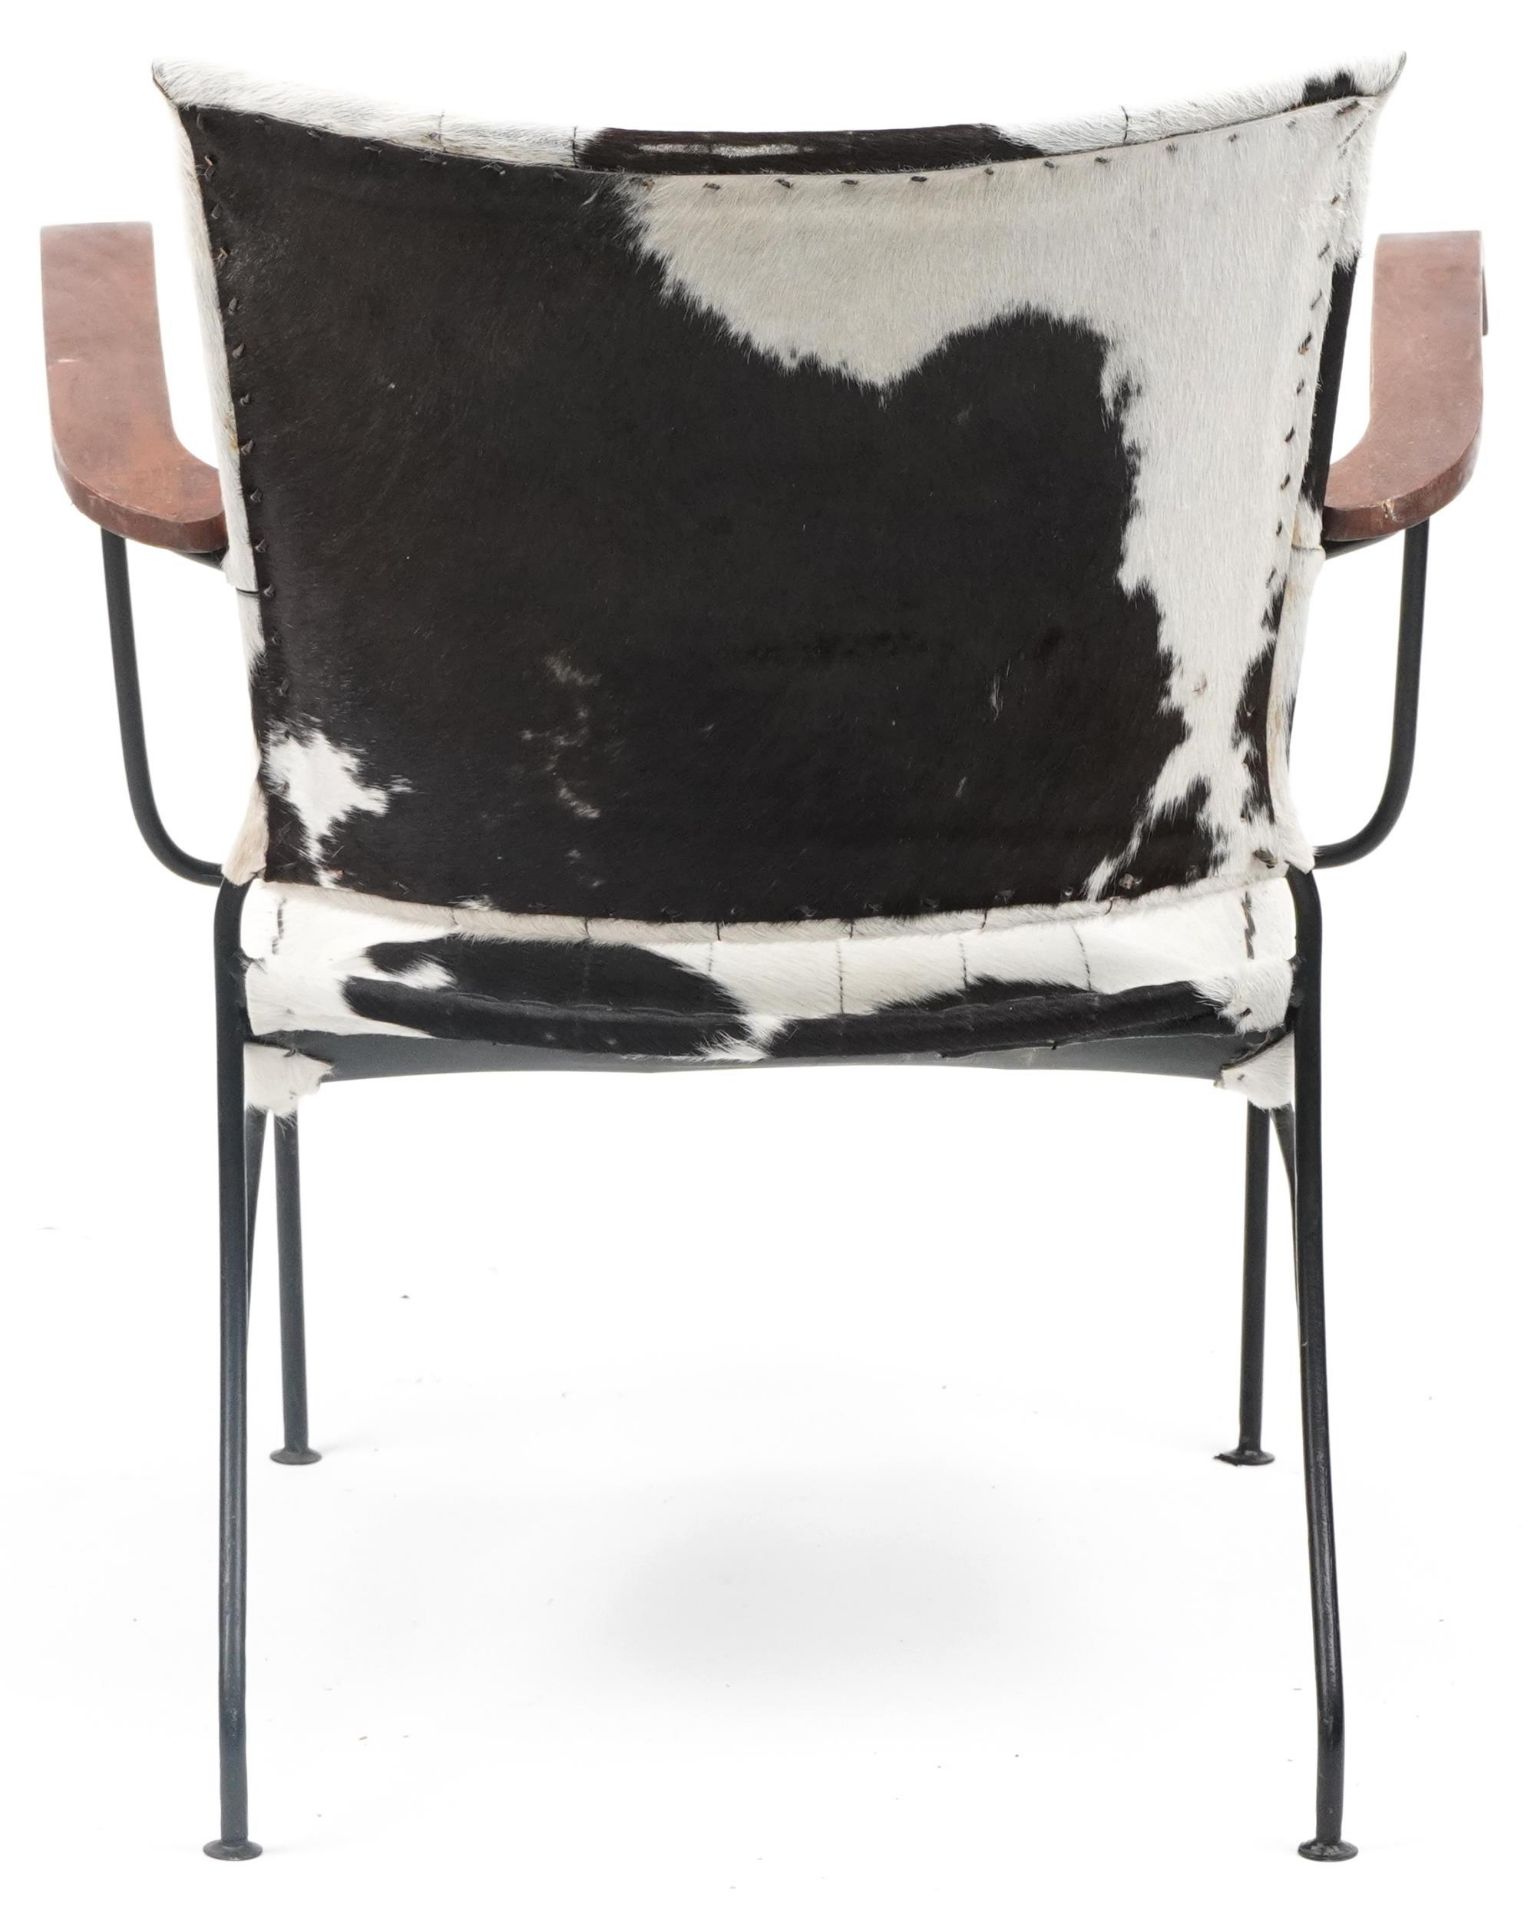 Brutalist style wrought iron and cow hide armchair, 75cm high - Image 4 of 4